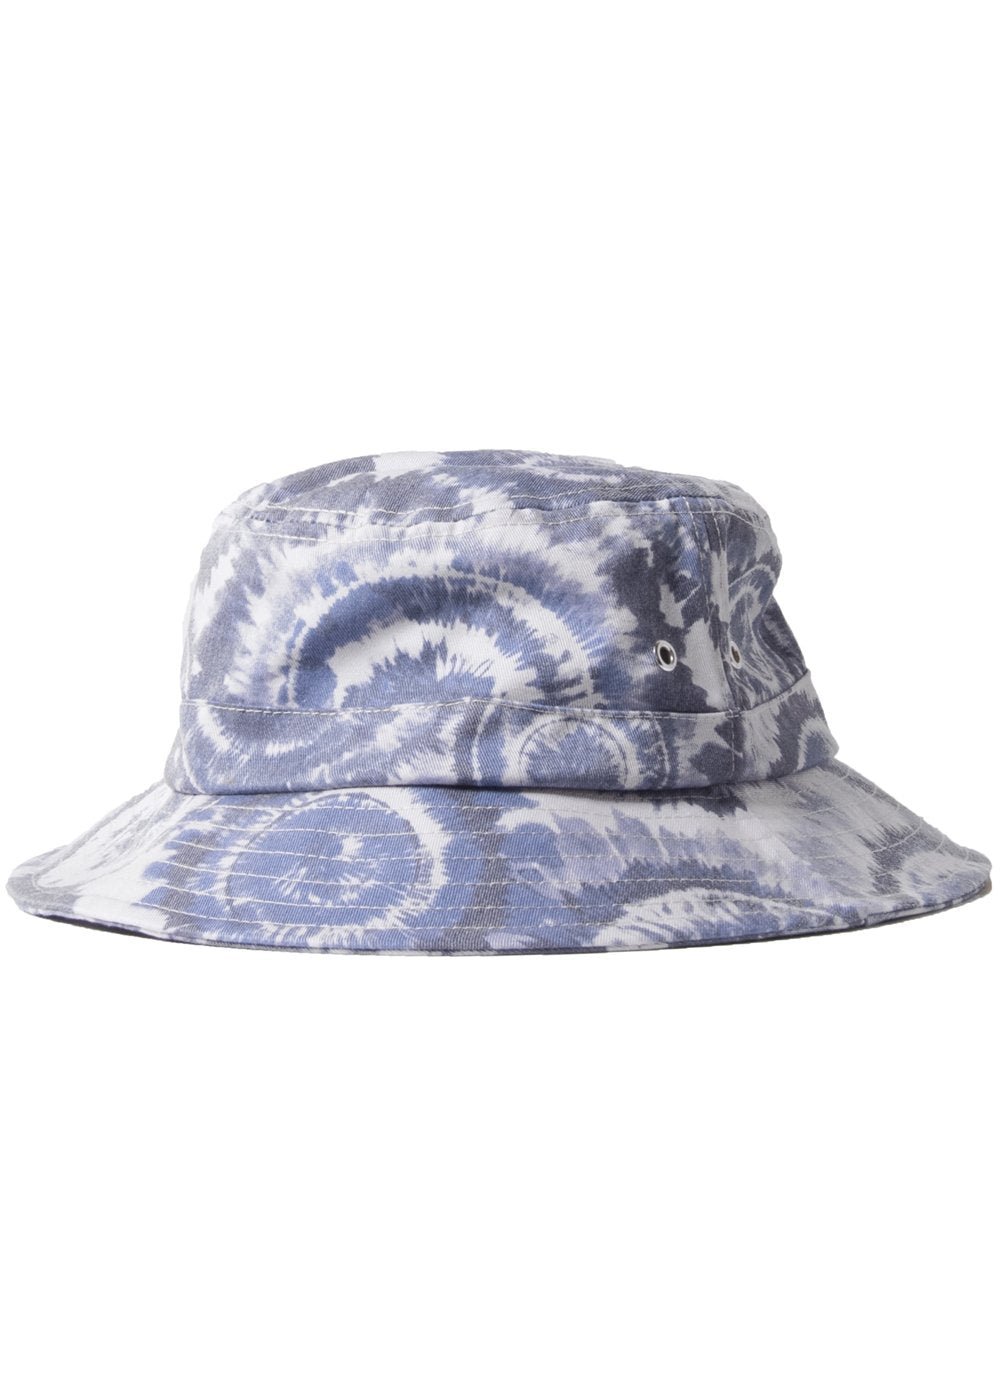 Shred Head Bucket Hat-PCB - Stoke Outlets